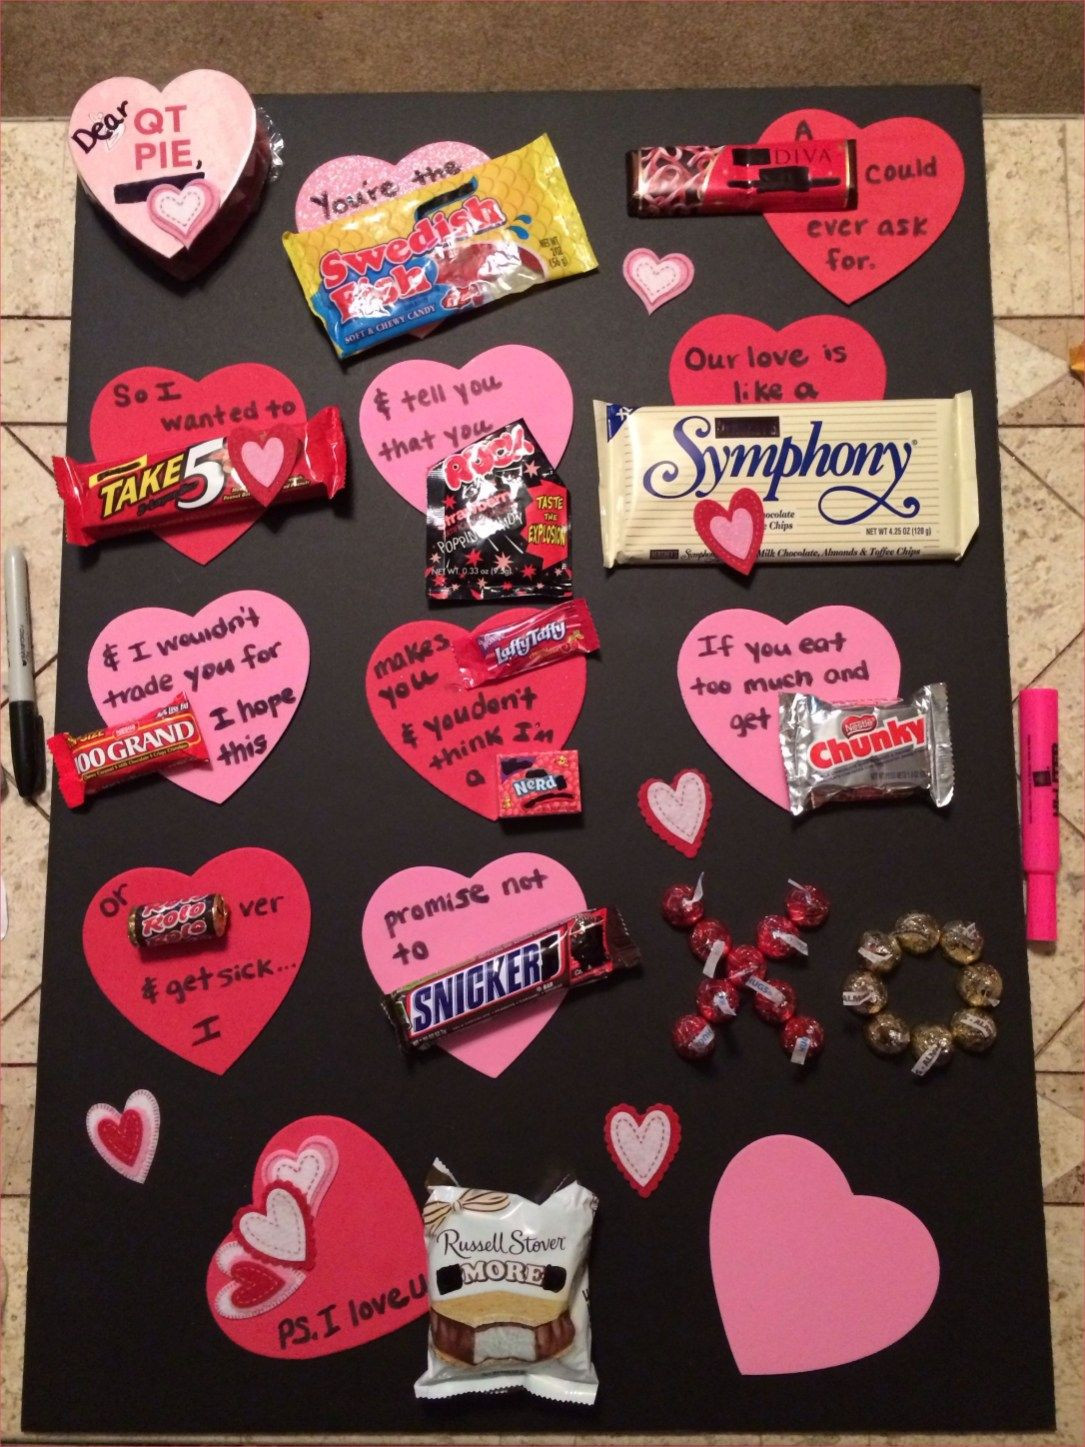 Creative Valentines Gift Ideas For Him
 25 Best Romantic DIY Valentine s Day Cards for Him